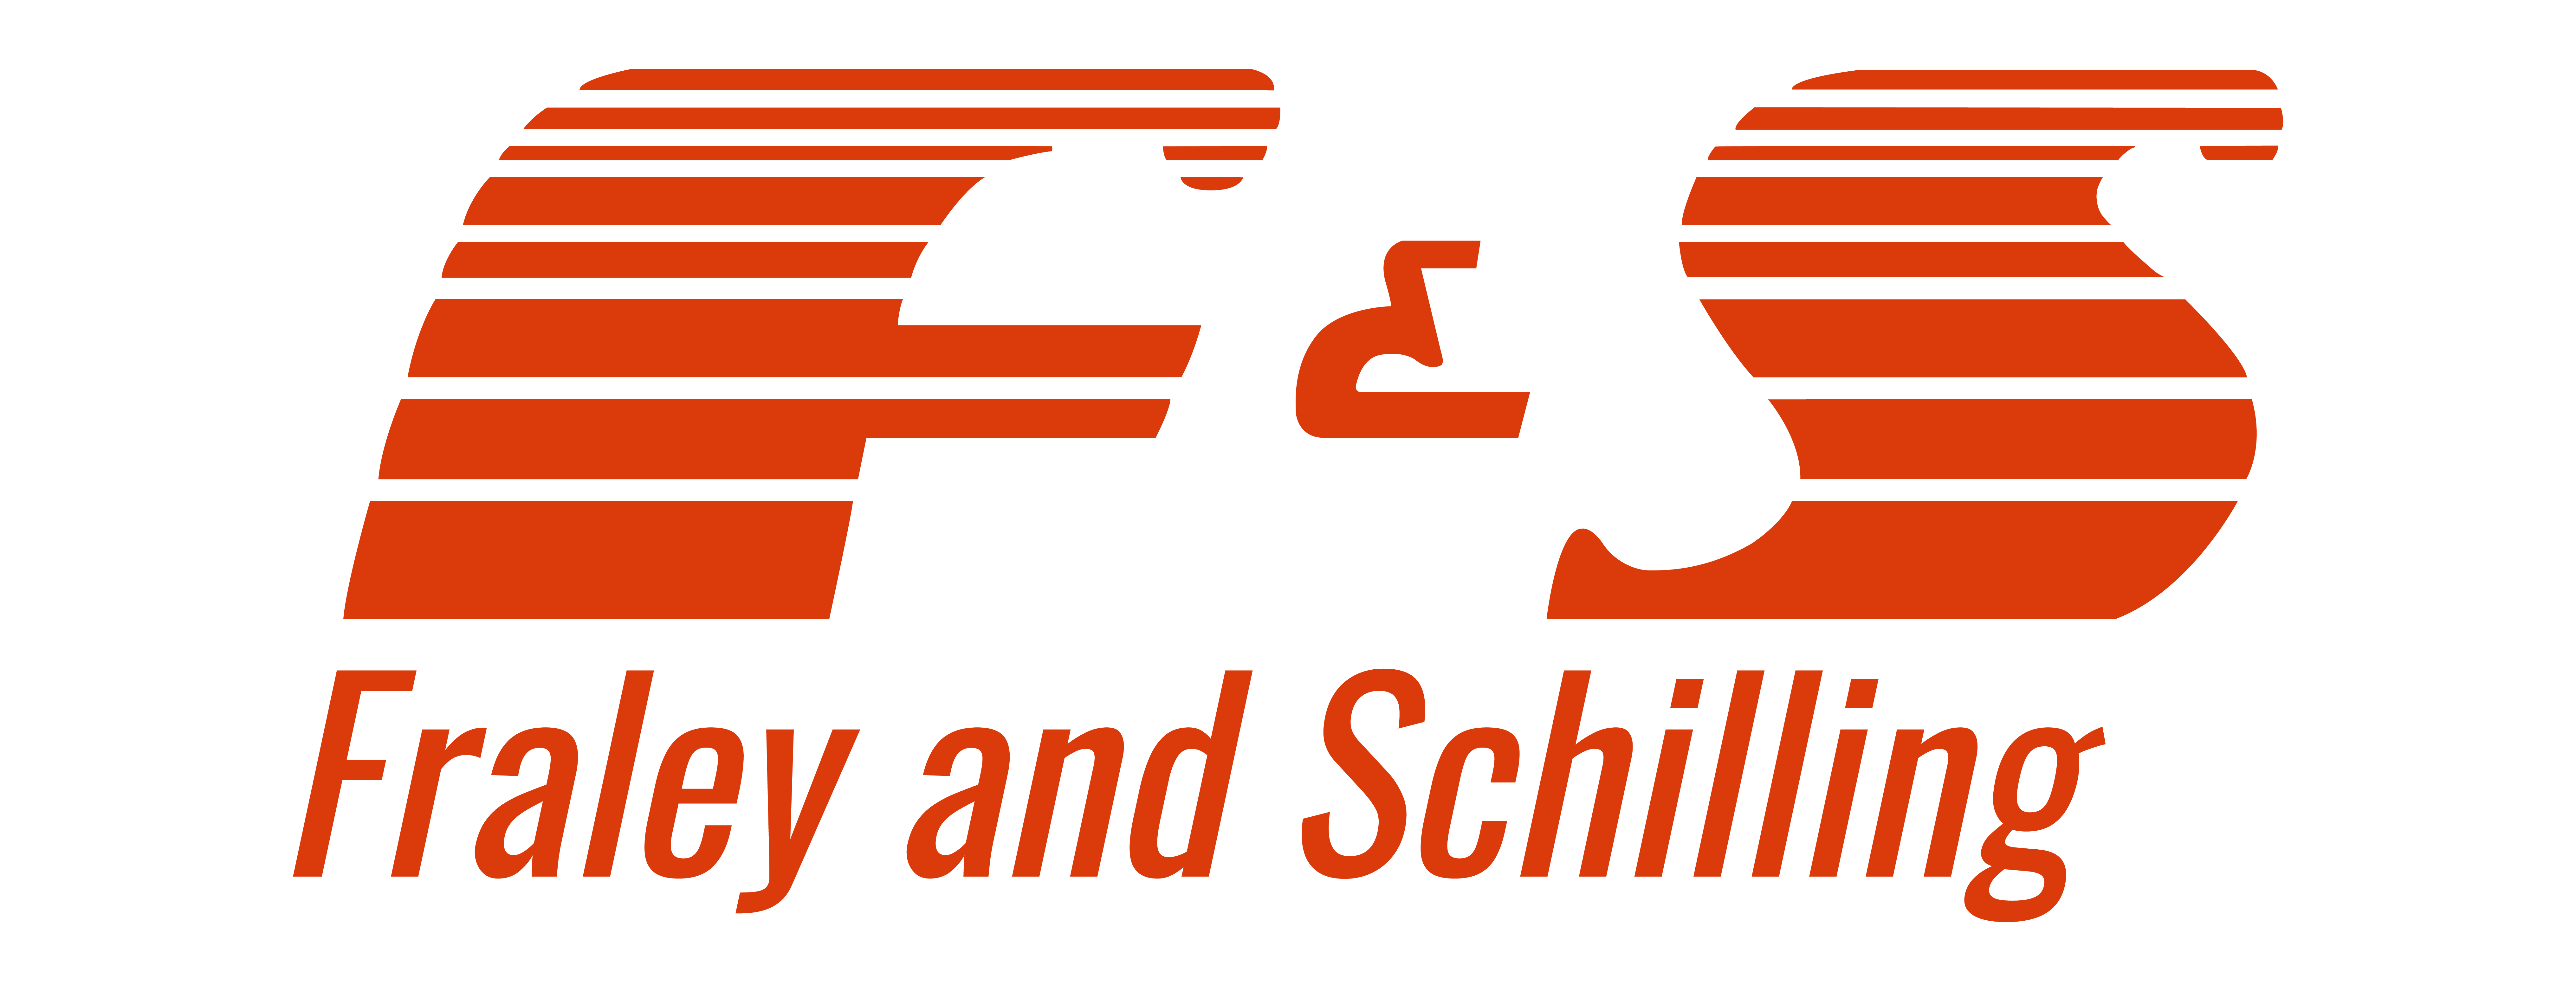 Fraley and Schilling logo